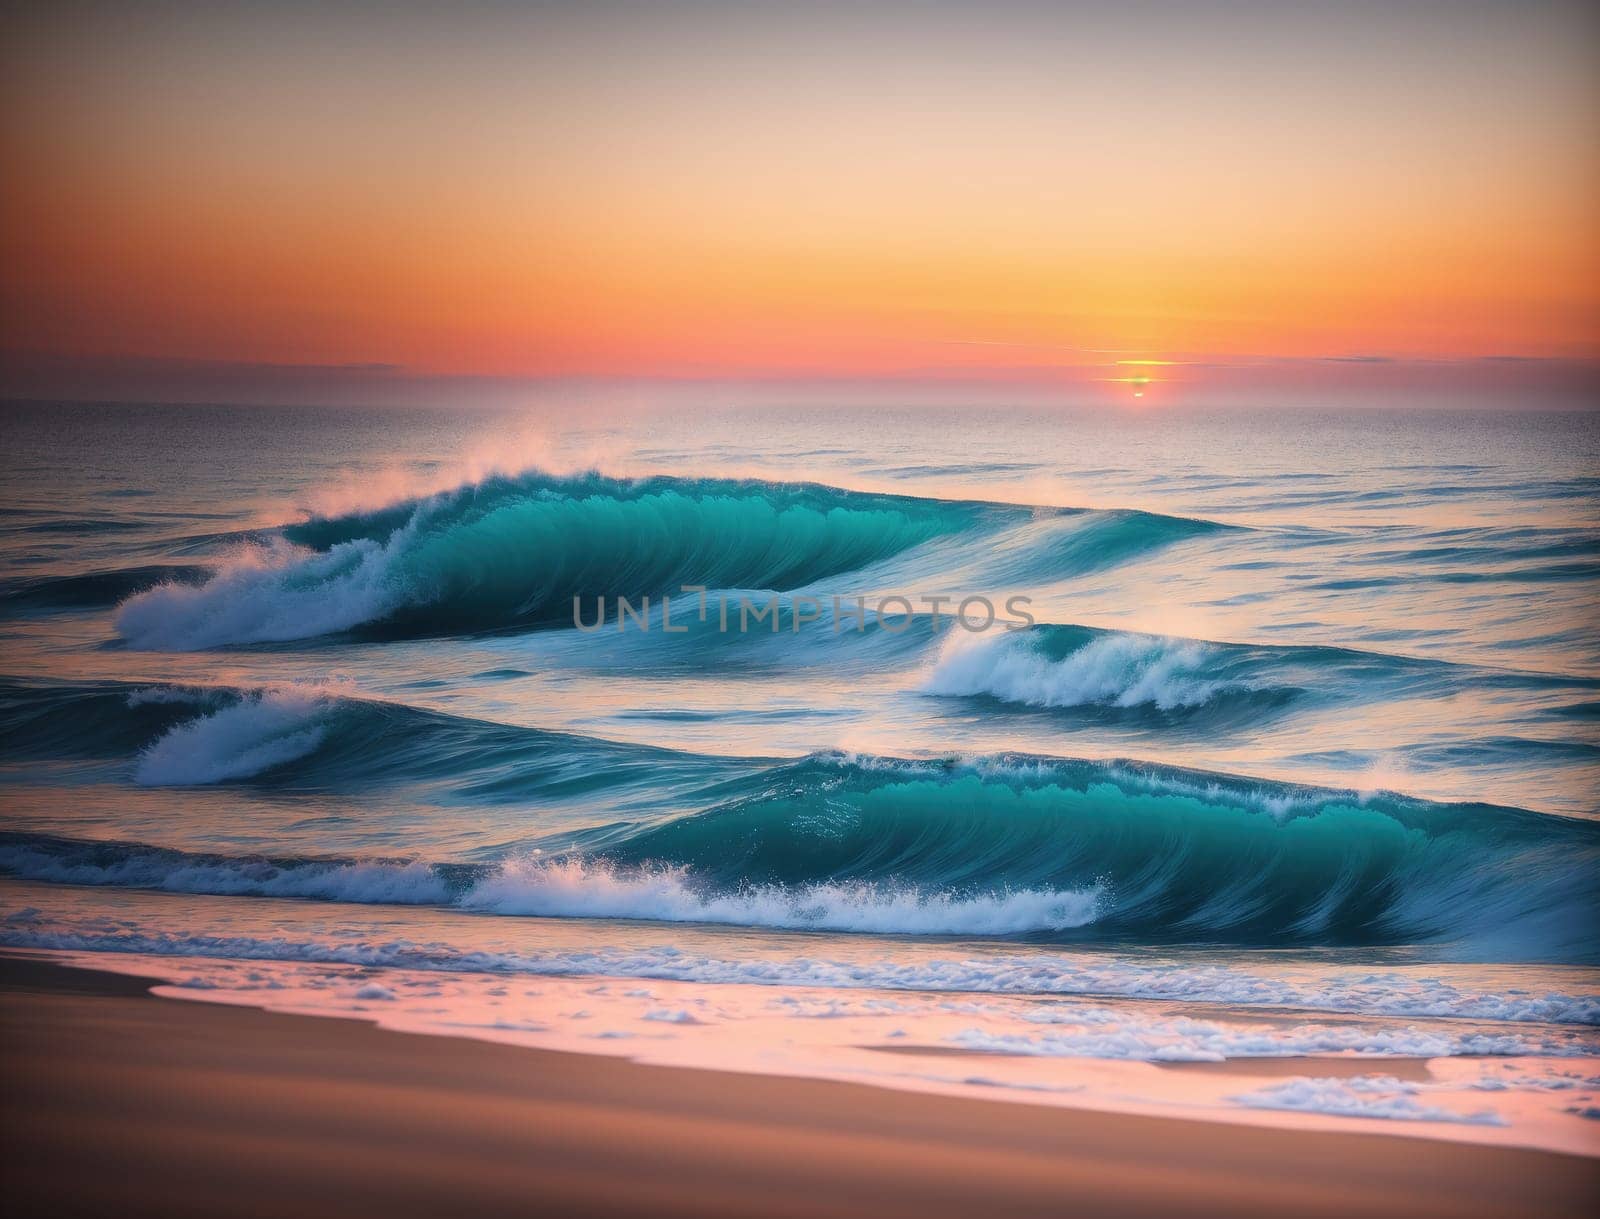 The image shows a sunrise over the ocean with large waves crashing against the shore.